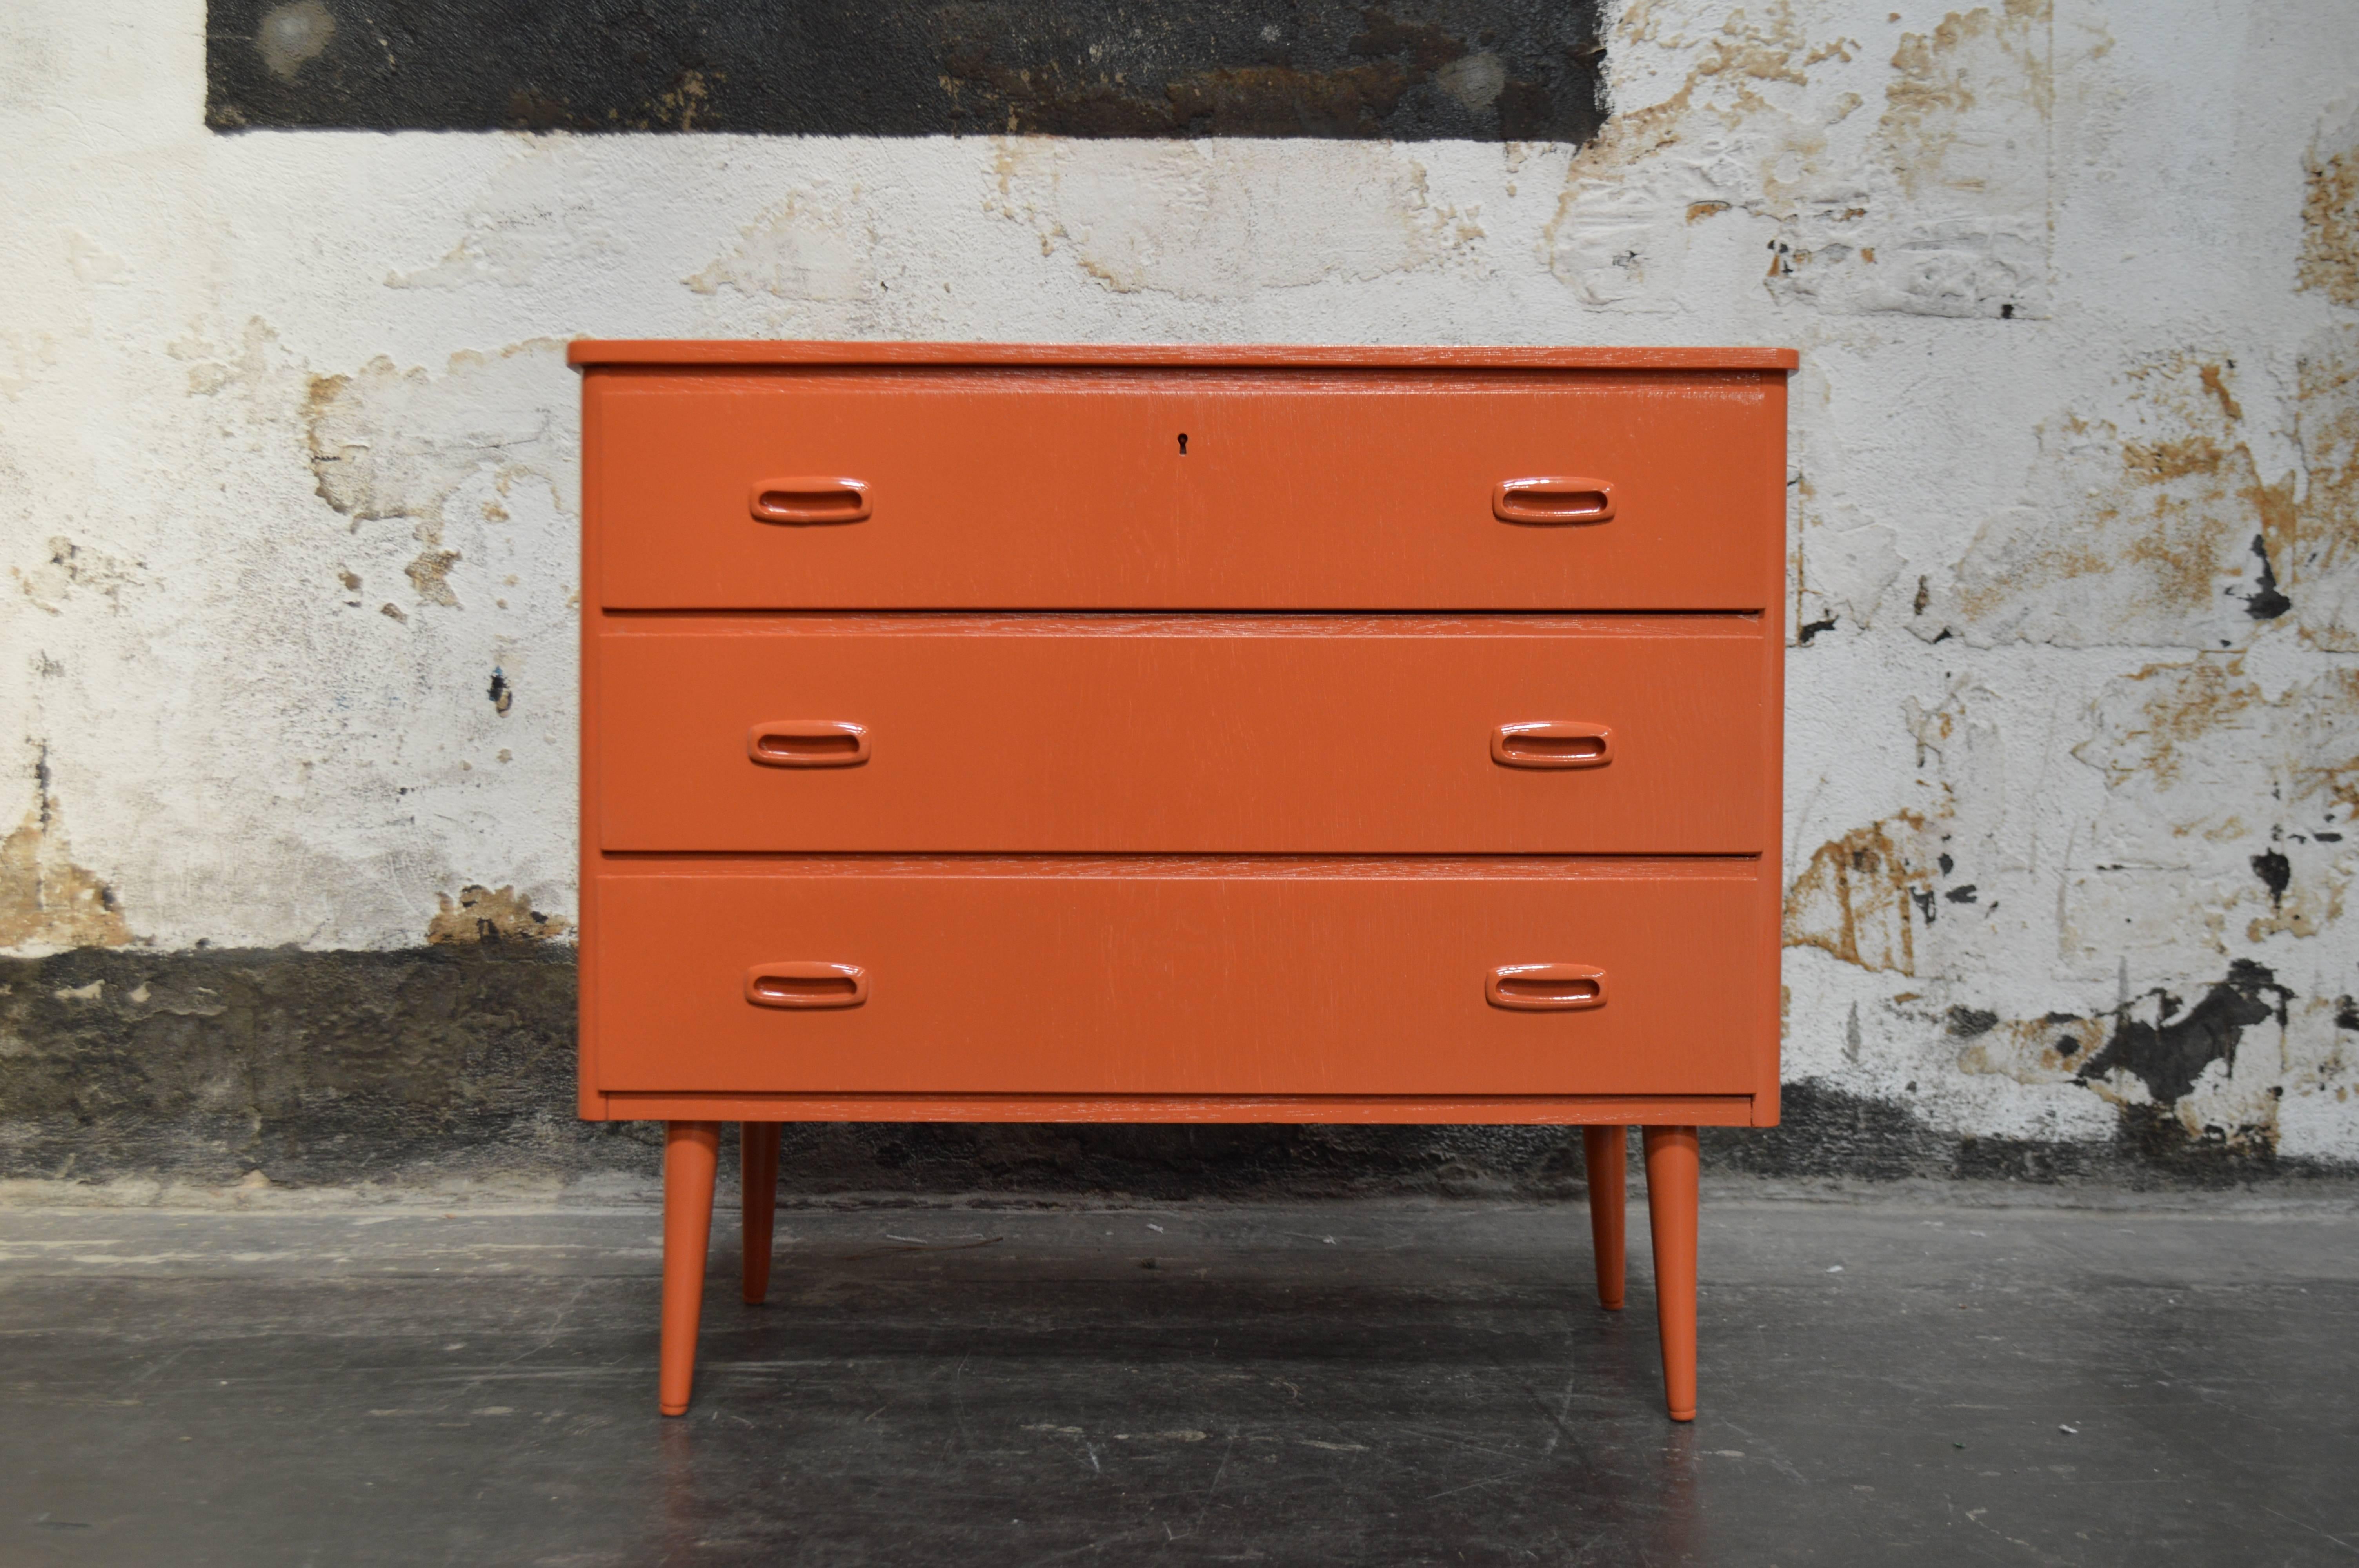 Mid-Century Modern three-drawer teak chest newly refinished in shiny dark orange lacquer on round tapered legs with original inset pulls.

A great piece to store your bedding or clothes. Works really well as a nightstand. A handsome piece of